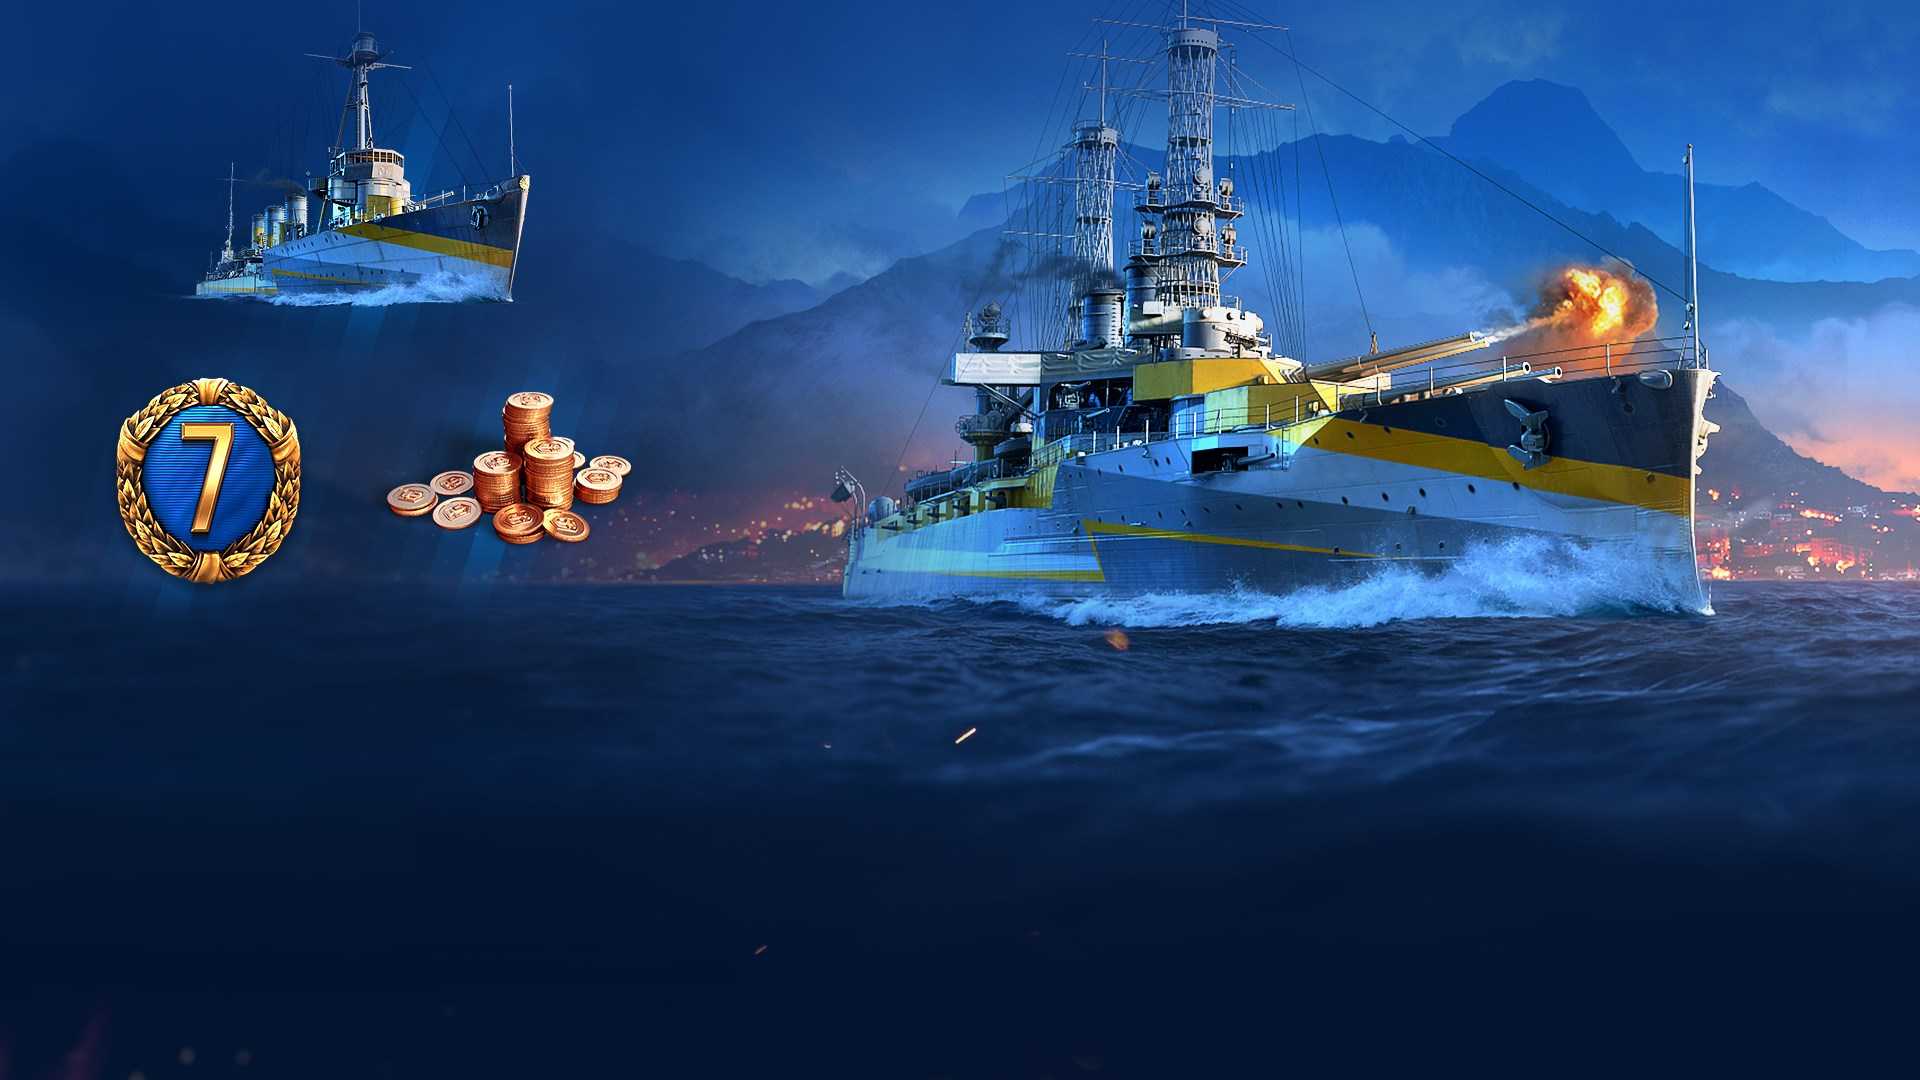 google pay to purchase world of warships premium shop items